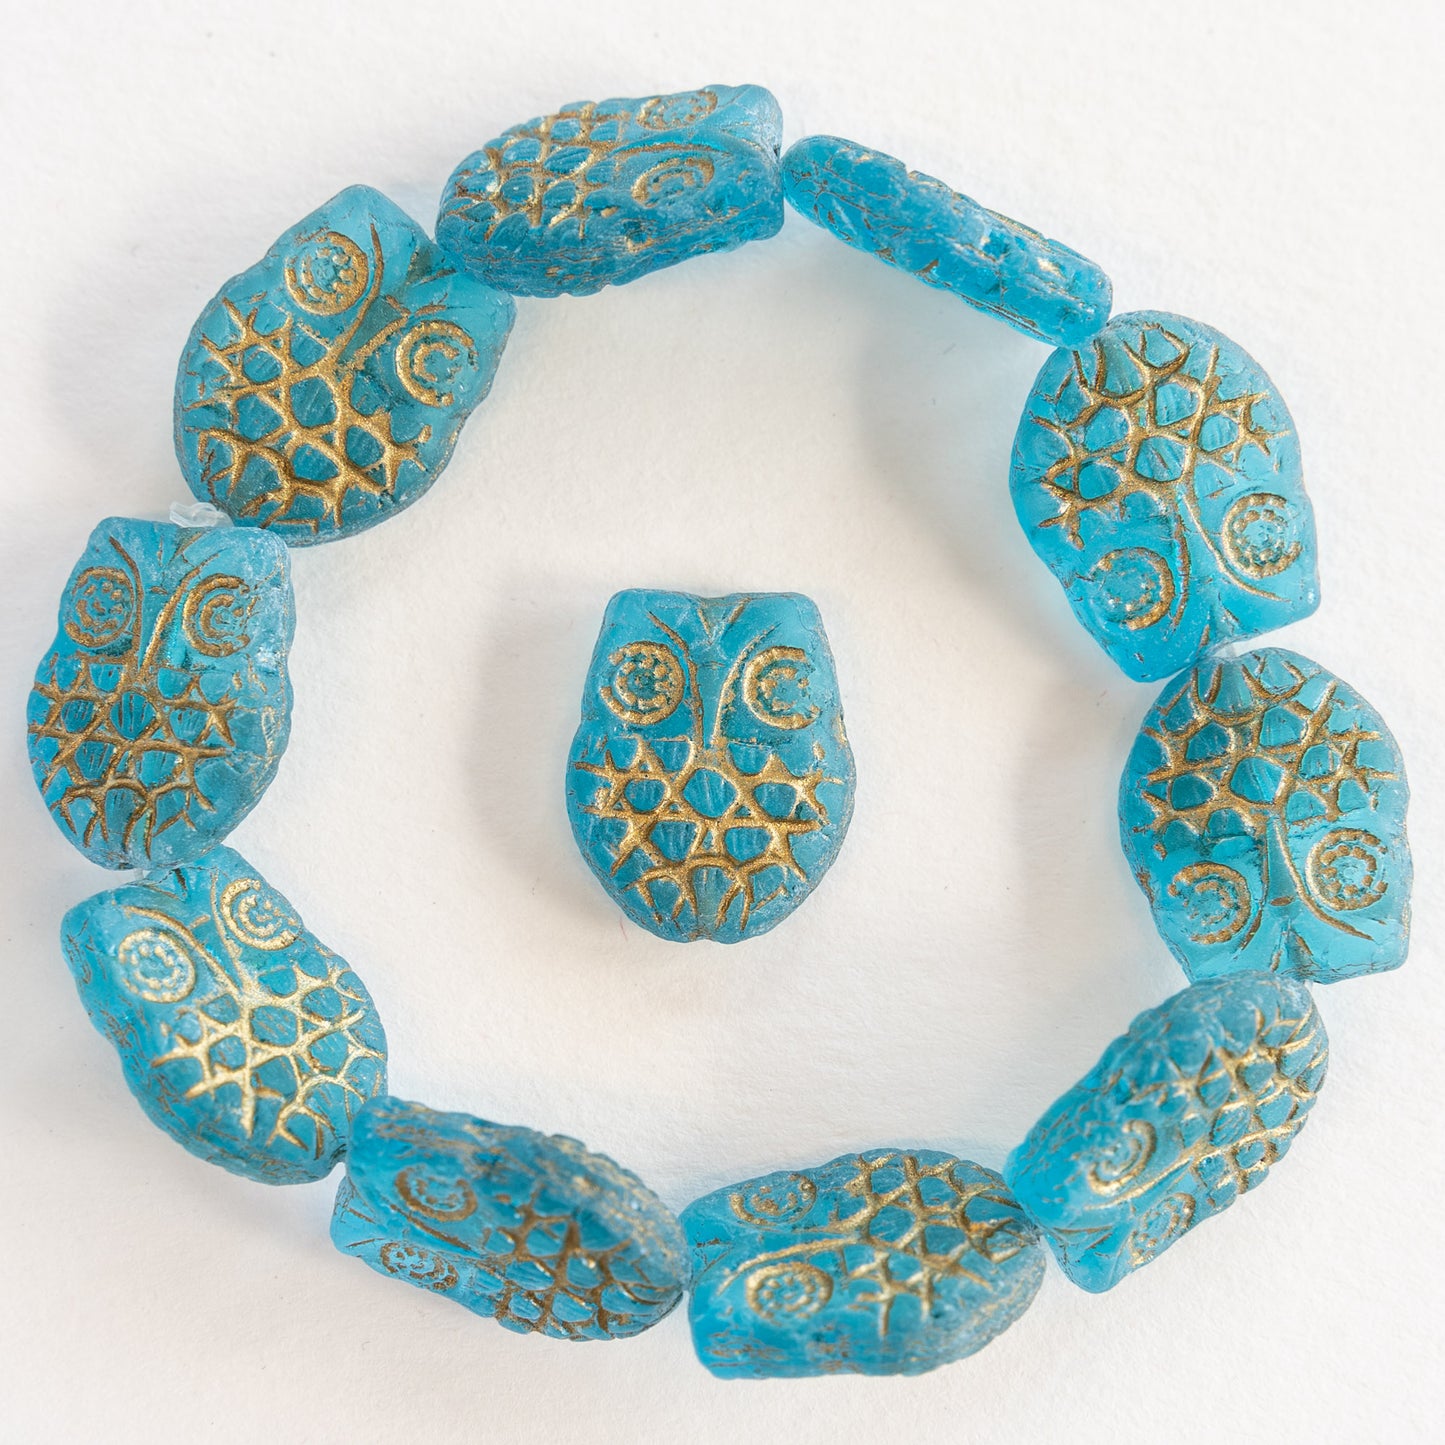 Glass Owl Beads - Aqua with Gold Wash - 4, 8, or 12